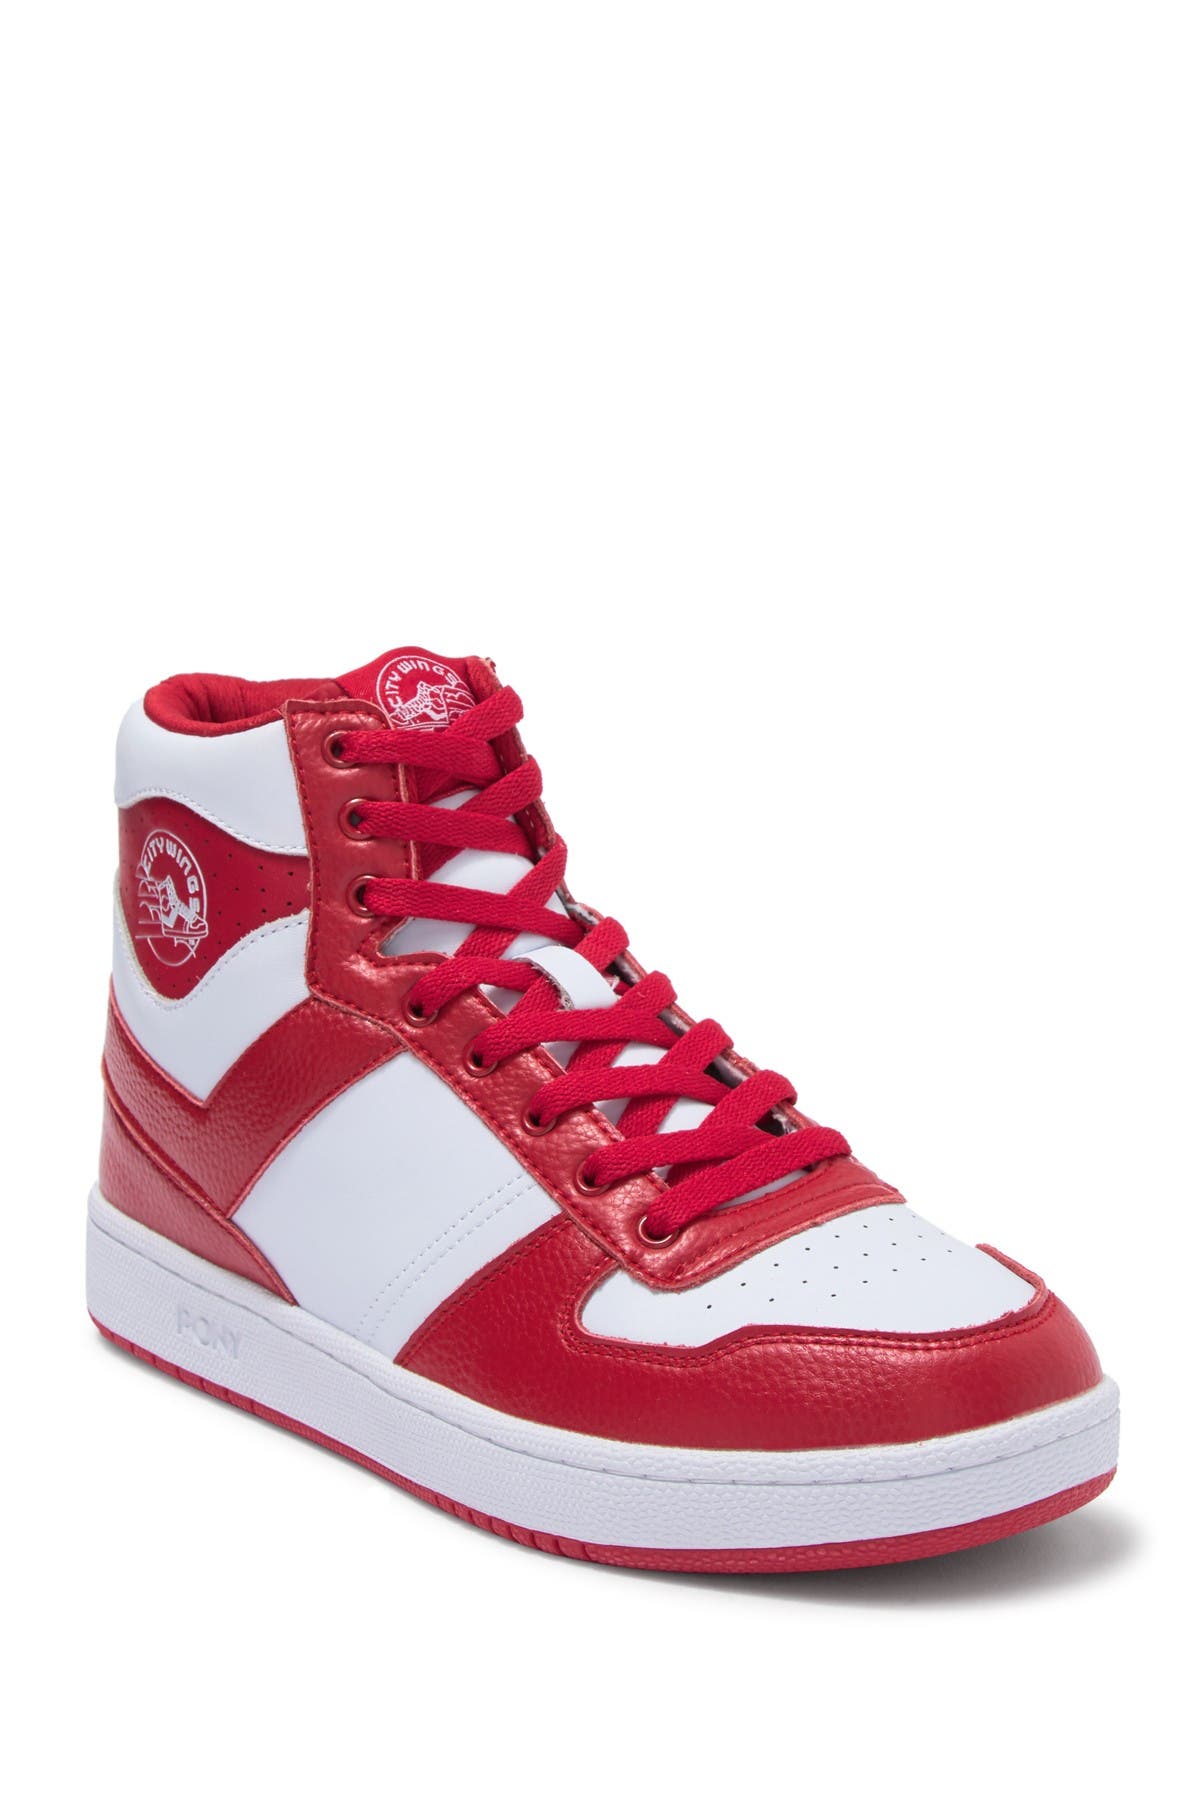 pony high top sneakers